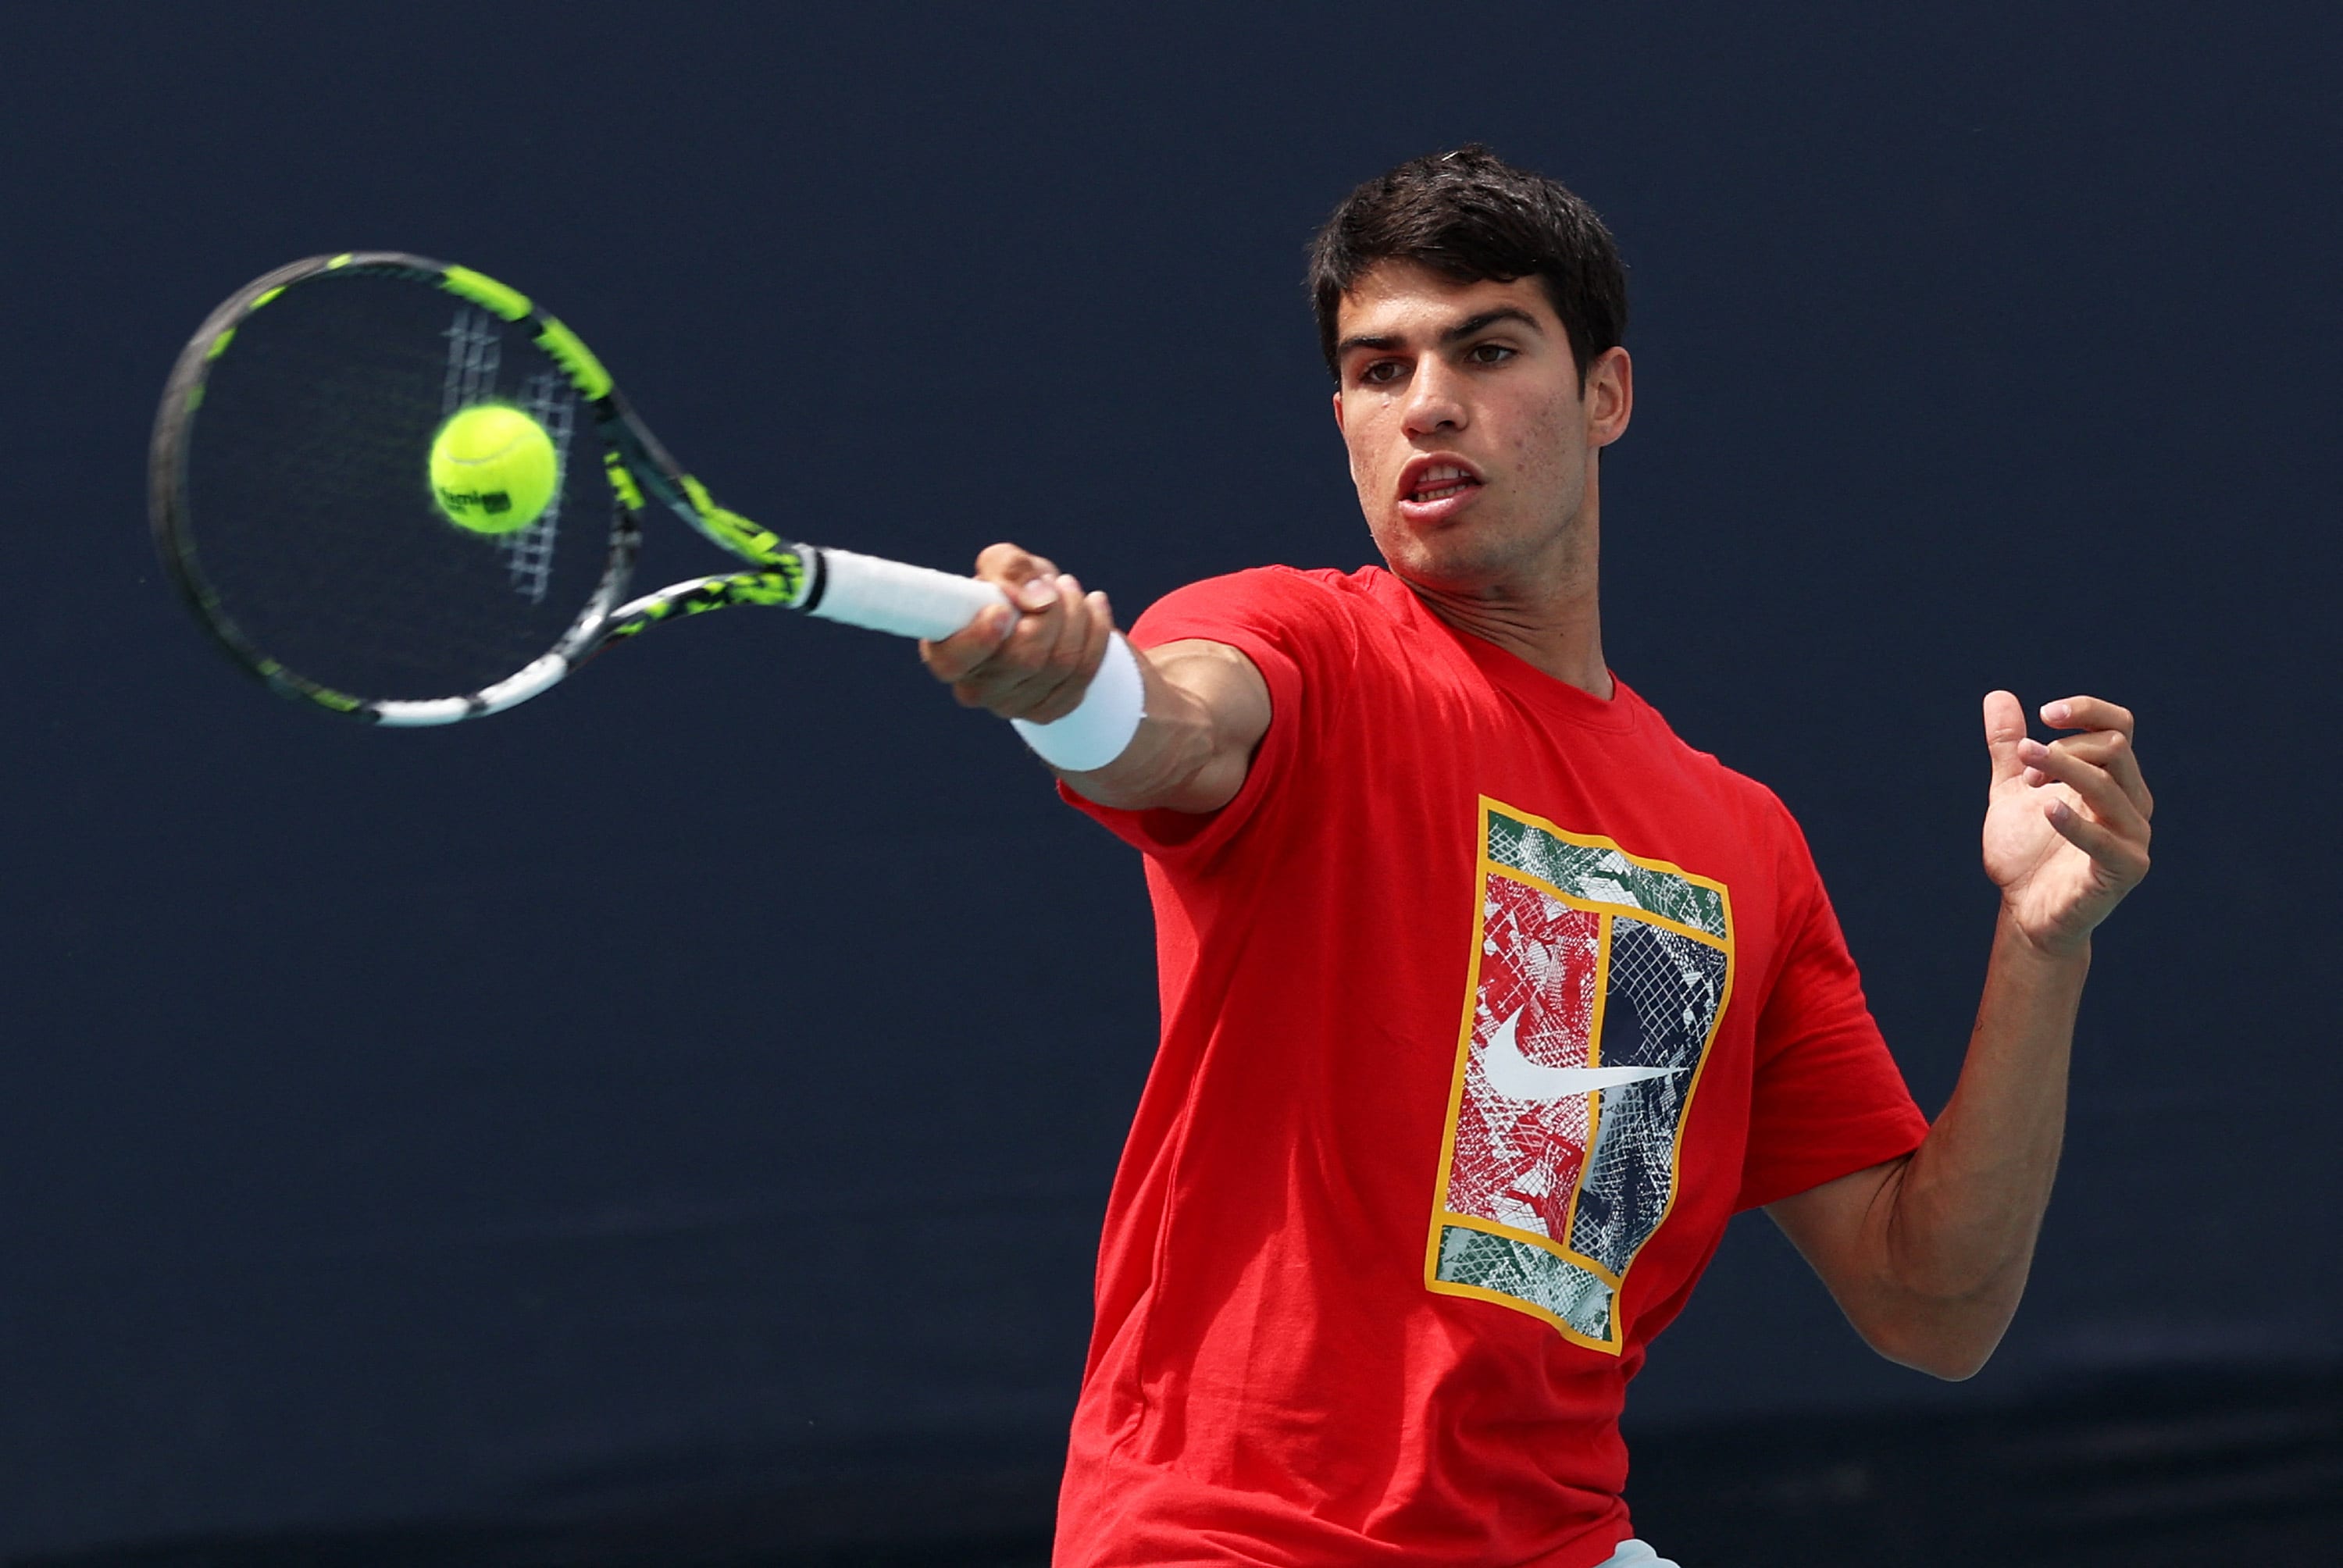 Alcaraz overwhelms Fritz and advances to the semifinals of the Miami Masters 1000